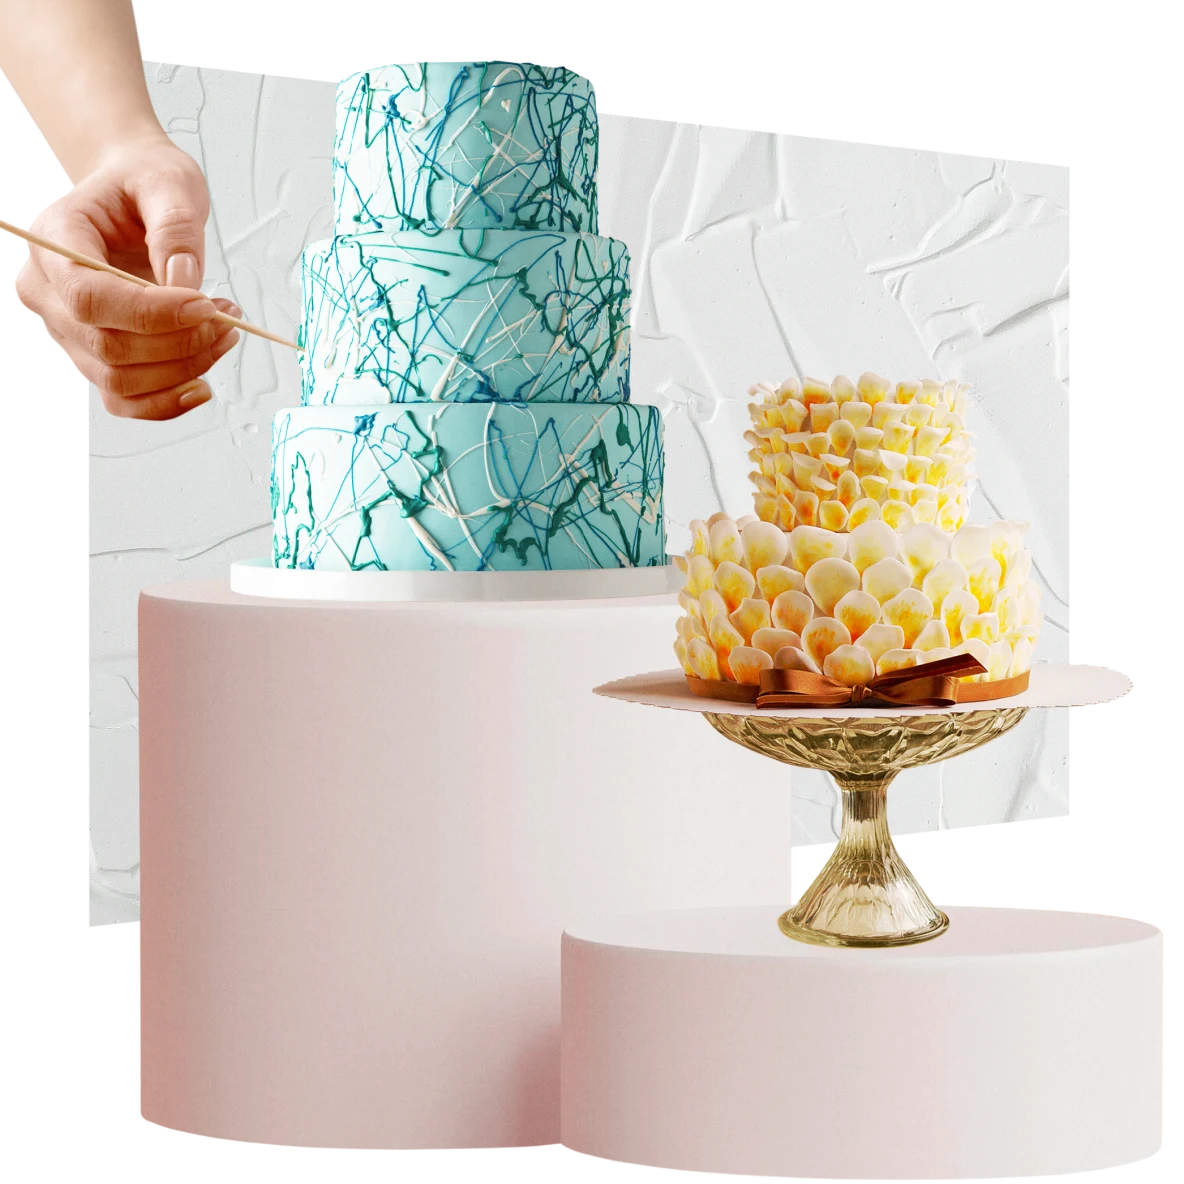 Light green, three-tier cake on left, smaller yellow and white two-tier cake on right. Hand applies details to the cake on the left. White frosting background.